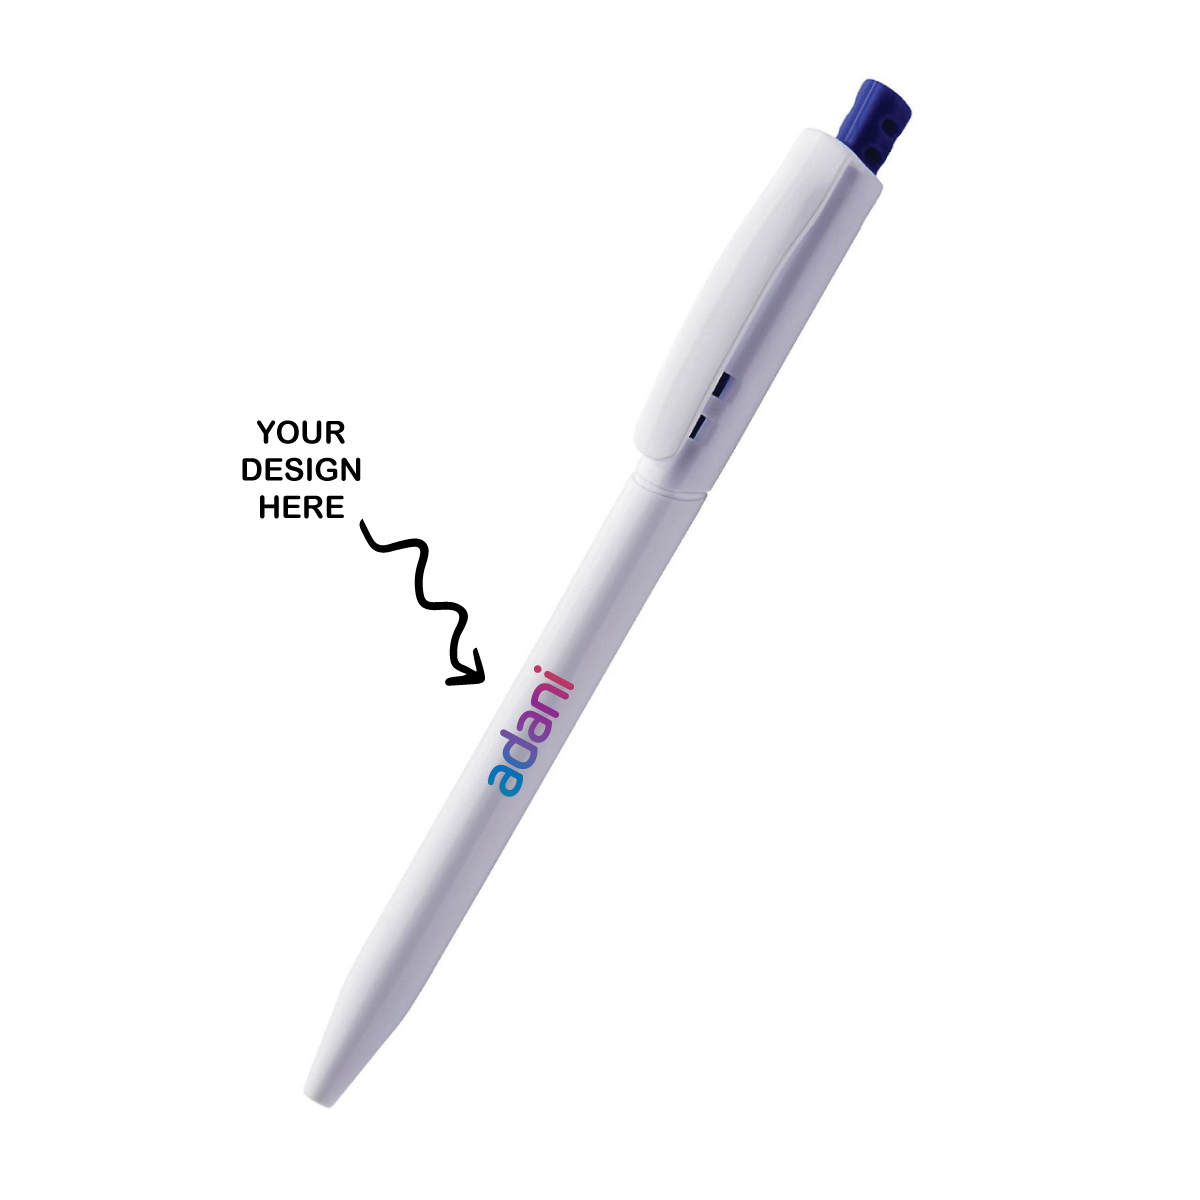 Personalized Plastic Ball Pen - For Corporate Gifting, Event or Exhibition Freebies, Promotional Item, Office Stationery JKP1